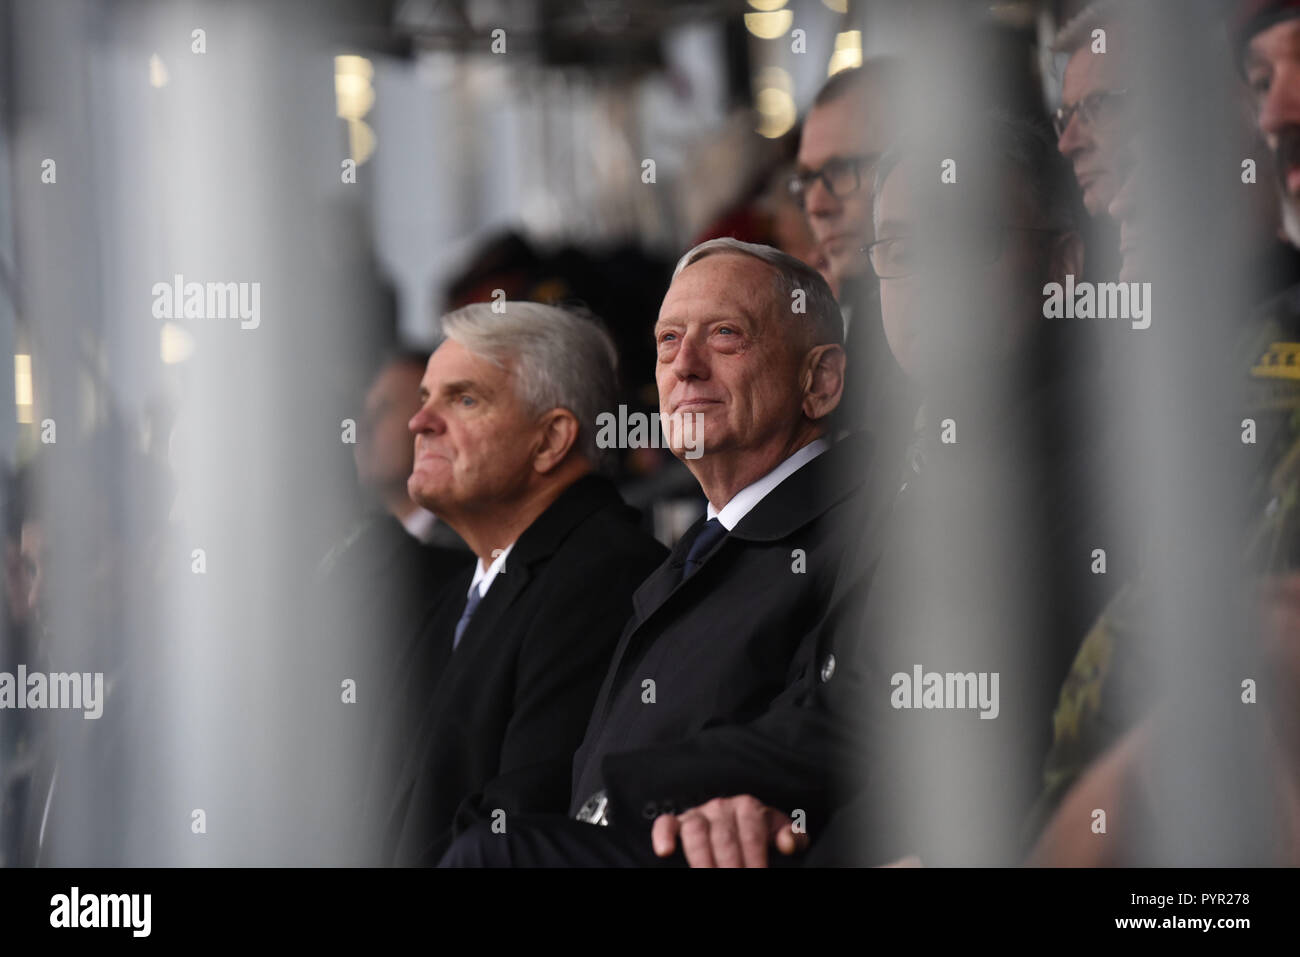 U.S. Secretary of Defense James N. Mattis observes a parade celebrating the Czech centennial, flanked by (left) U.S. ambassador to the Czech Republic, Stephen King, and (right) Czech minister of Defense, Lubomir Metnar, Prague, Czech Republic, Oct. 28, 2018. Members of the Nebraska and Texas National Guards marched in a Joint Color Guard. (DOD photo by Lisa Ferdinando) Stock Photo